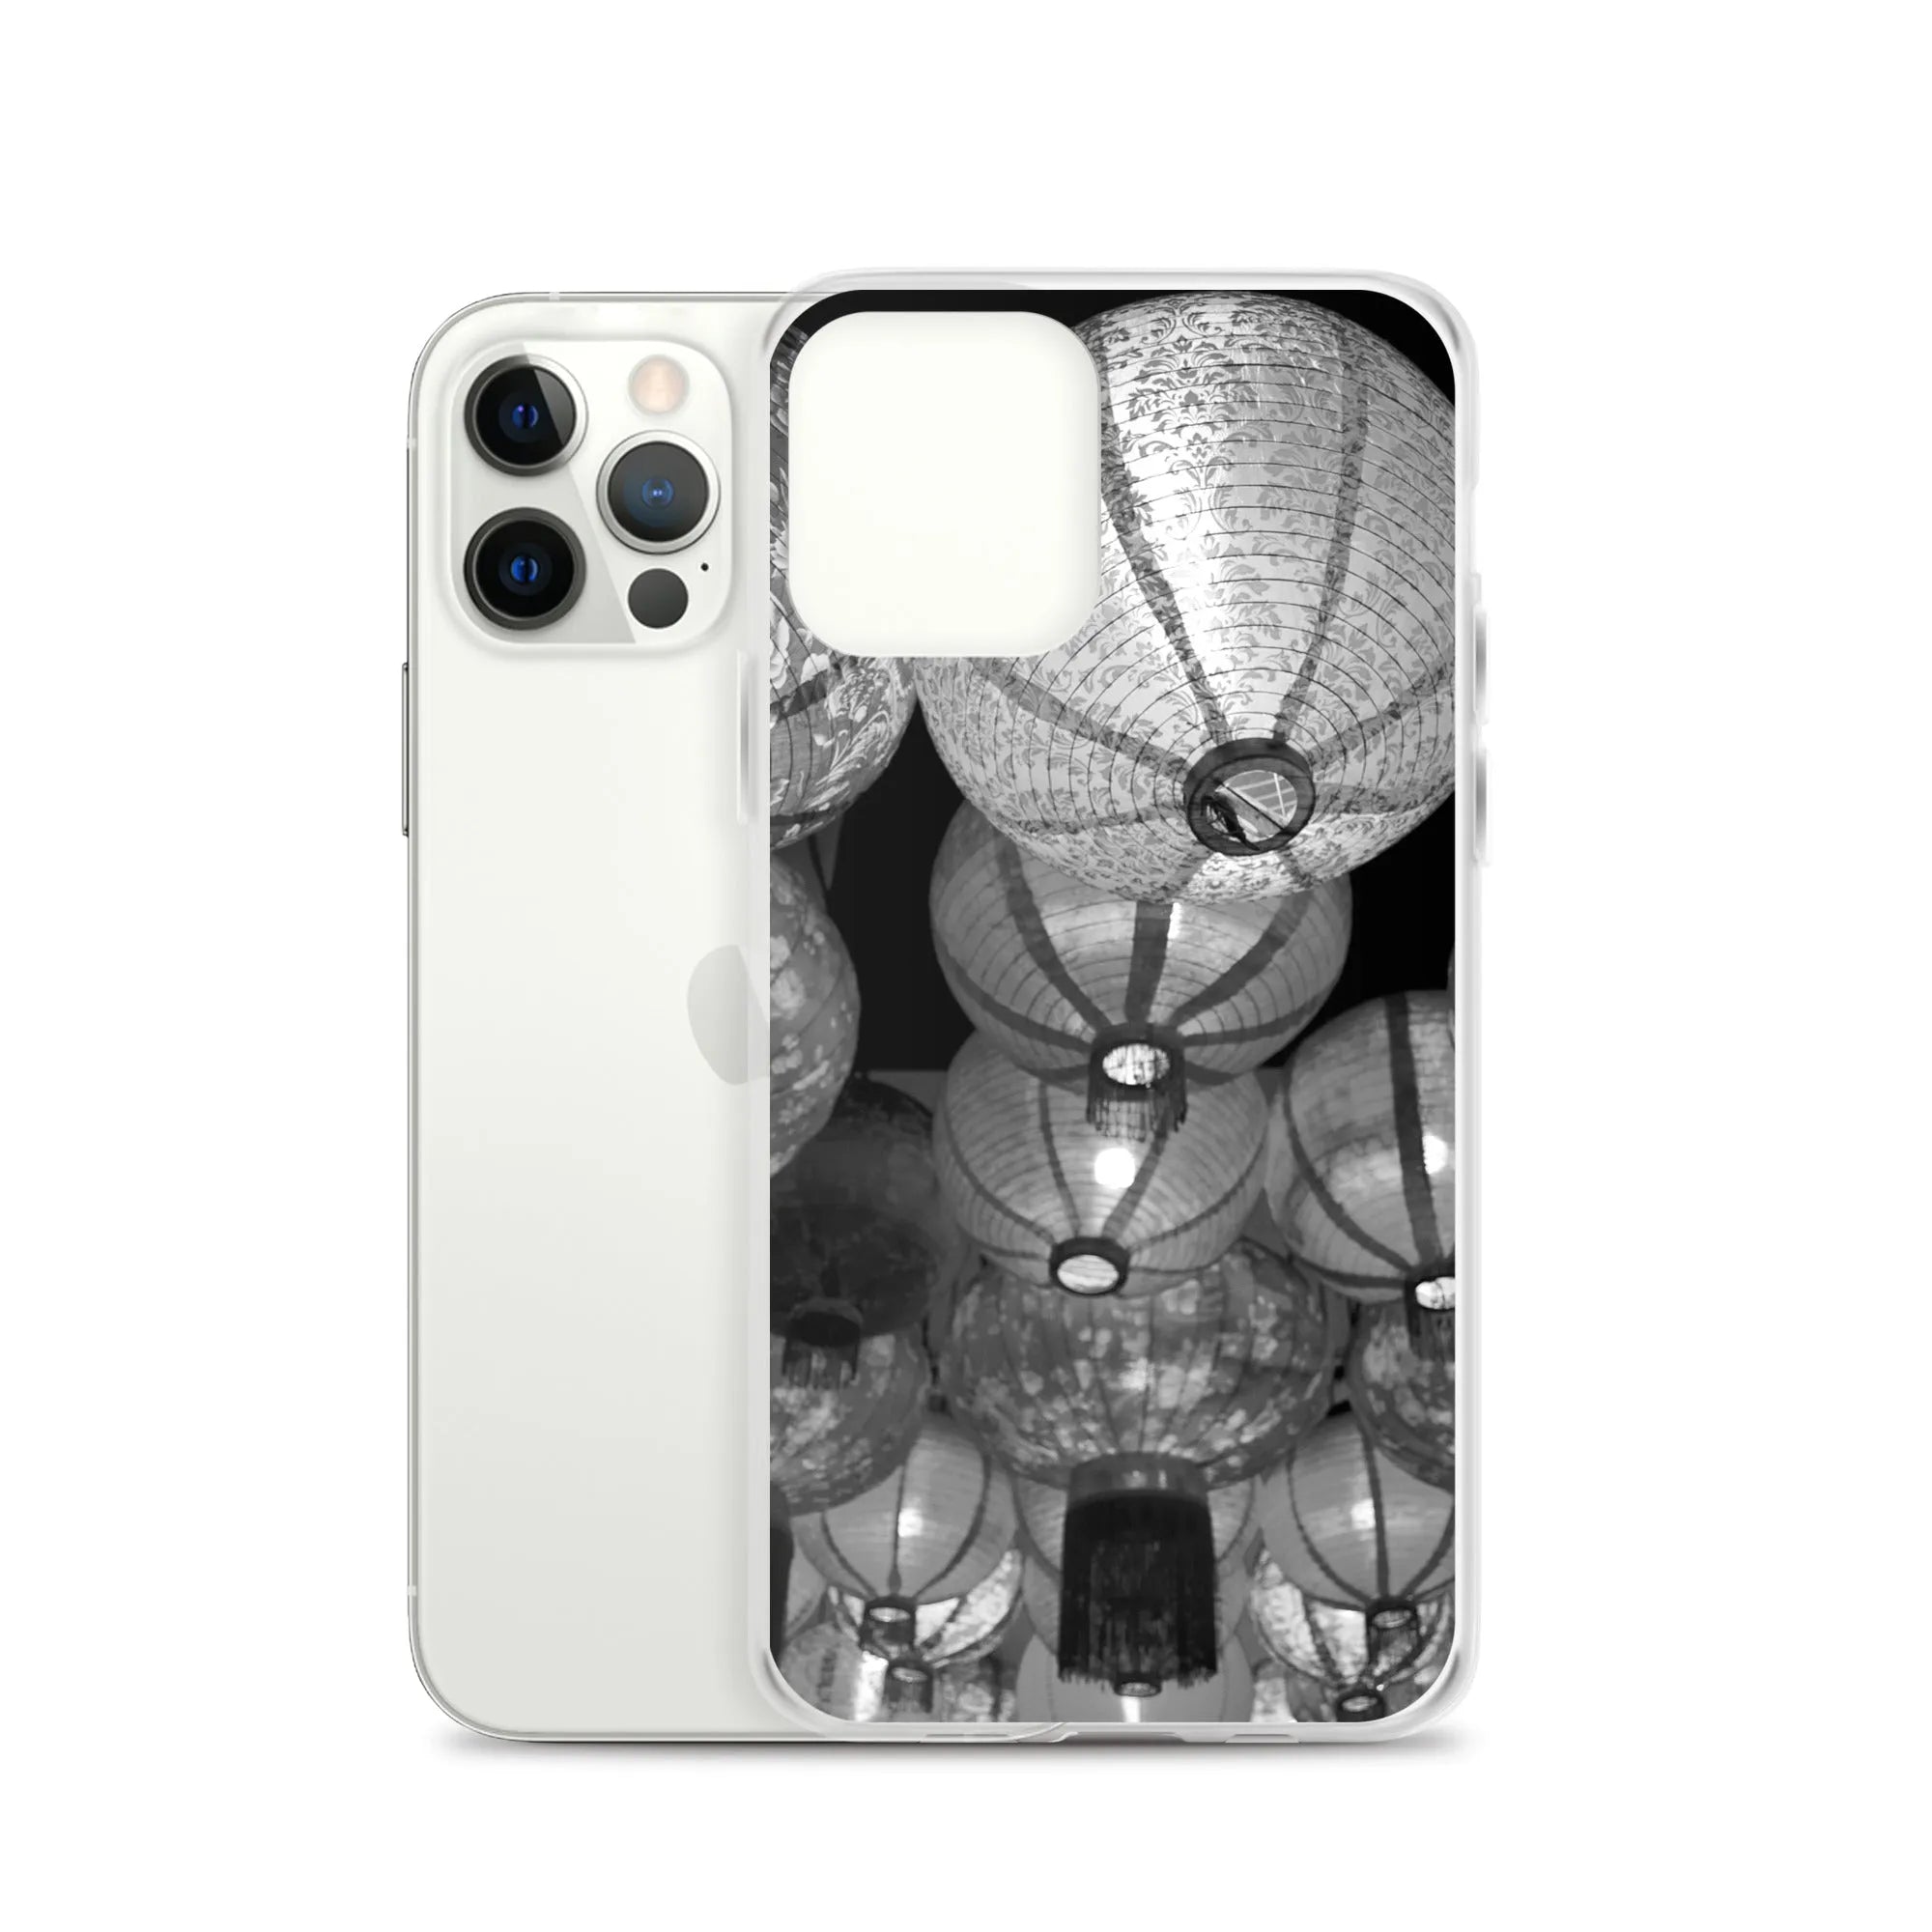 Raise The Red Lanterns - Designer Travels Art Iphone Case - Black And White - Iphone 12 Pro - Mobile Phone Cases